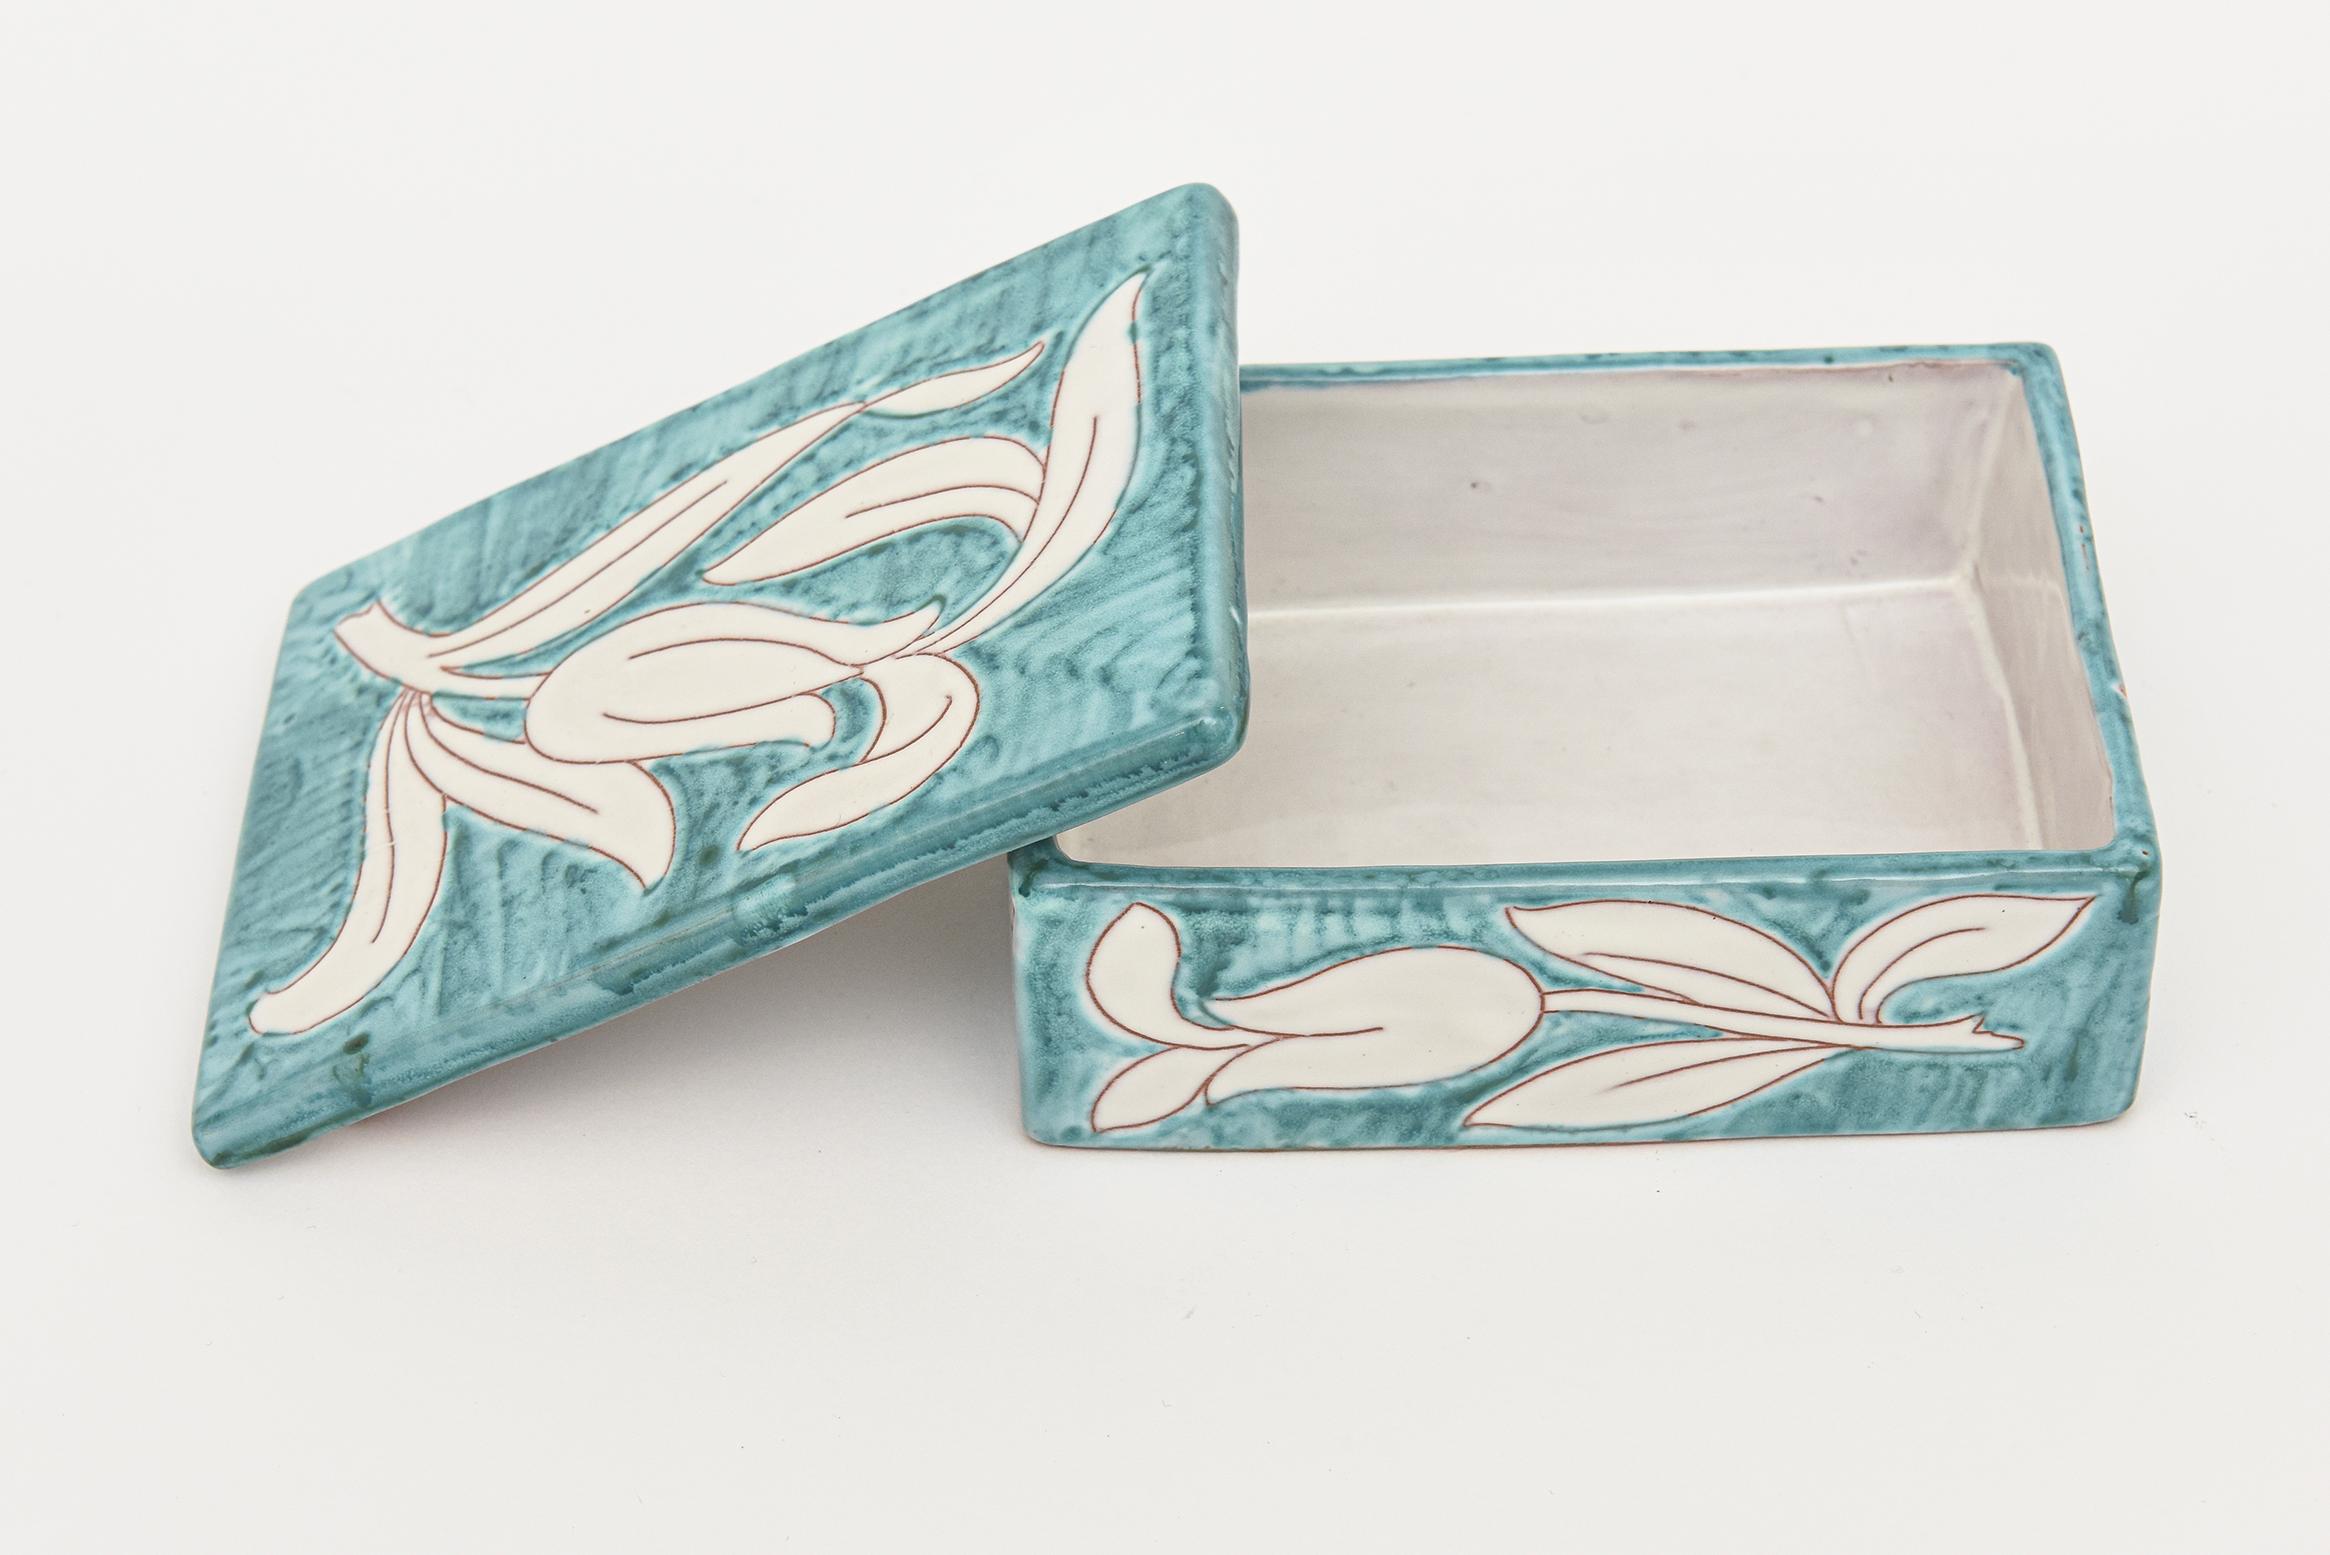 Vintage Italian Raymor Ceramic Lidded Flower Box Turquoise and White In Good Condition For Sale In North Miami, FL